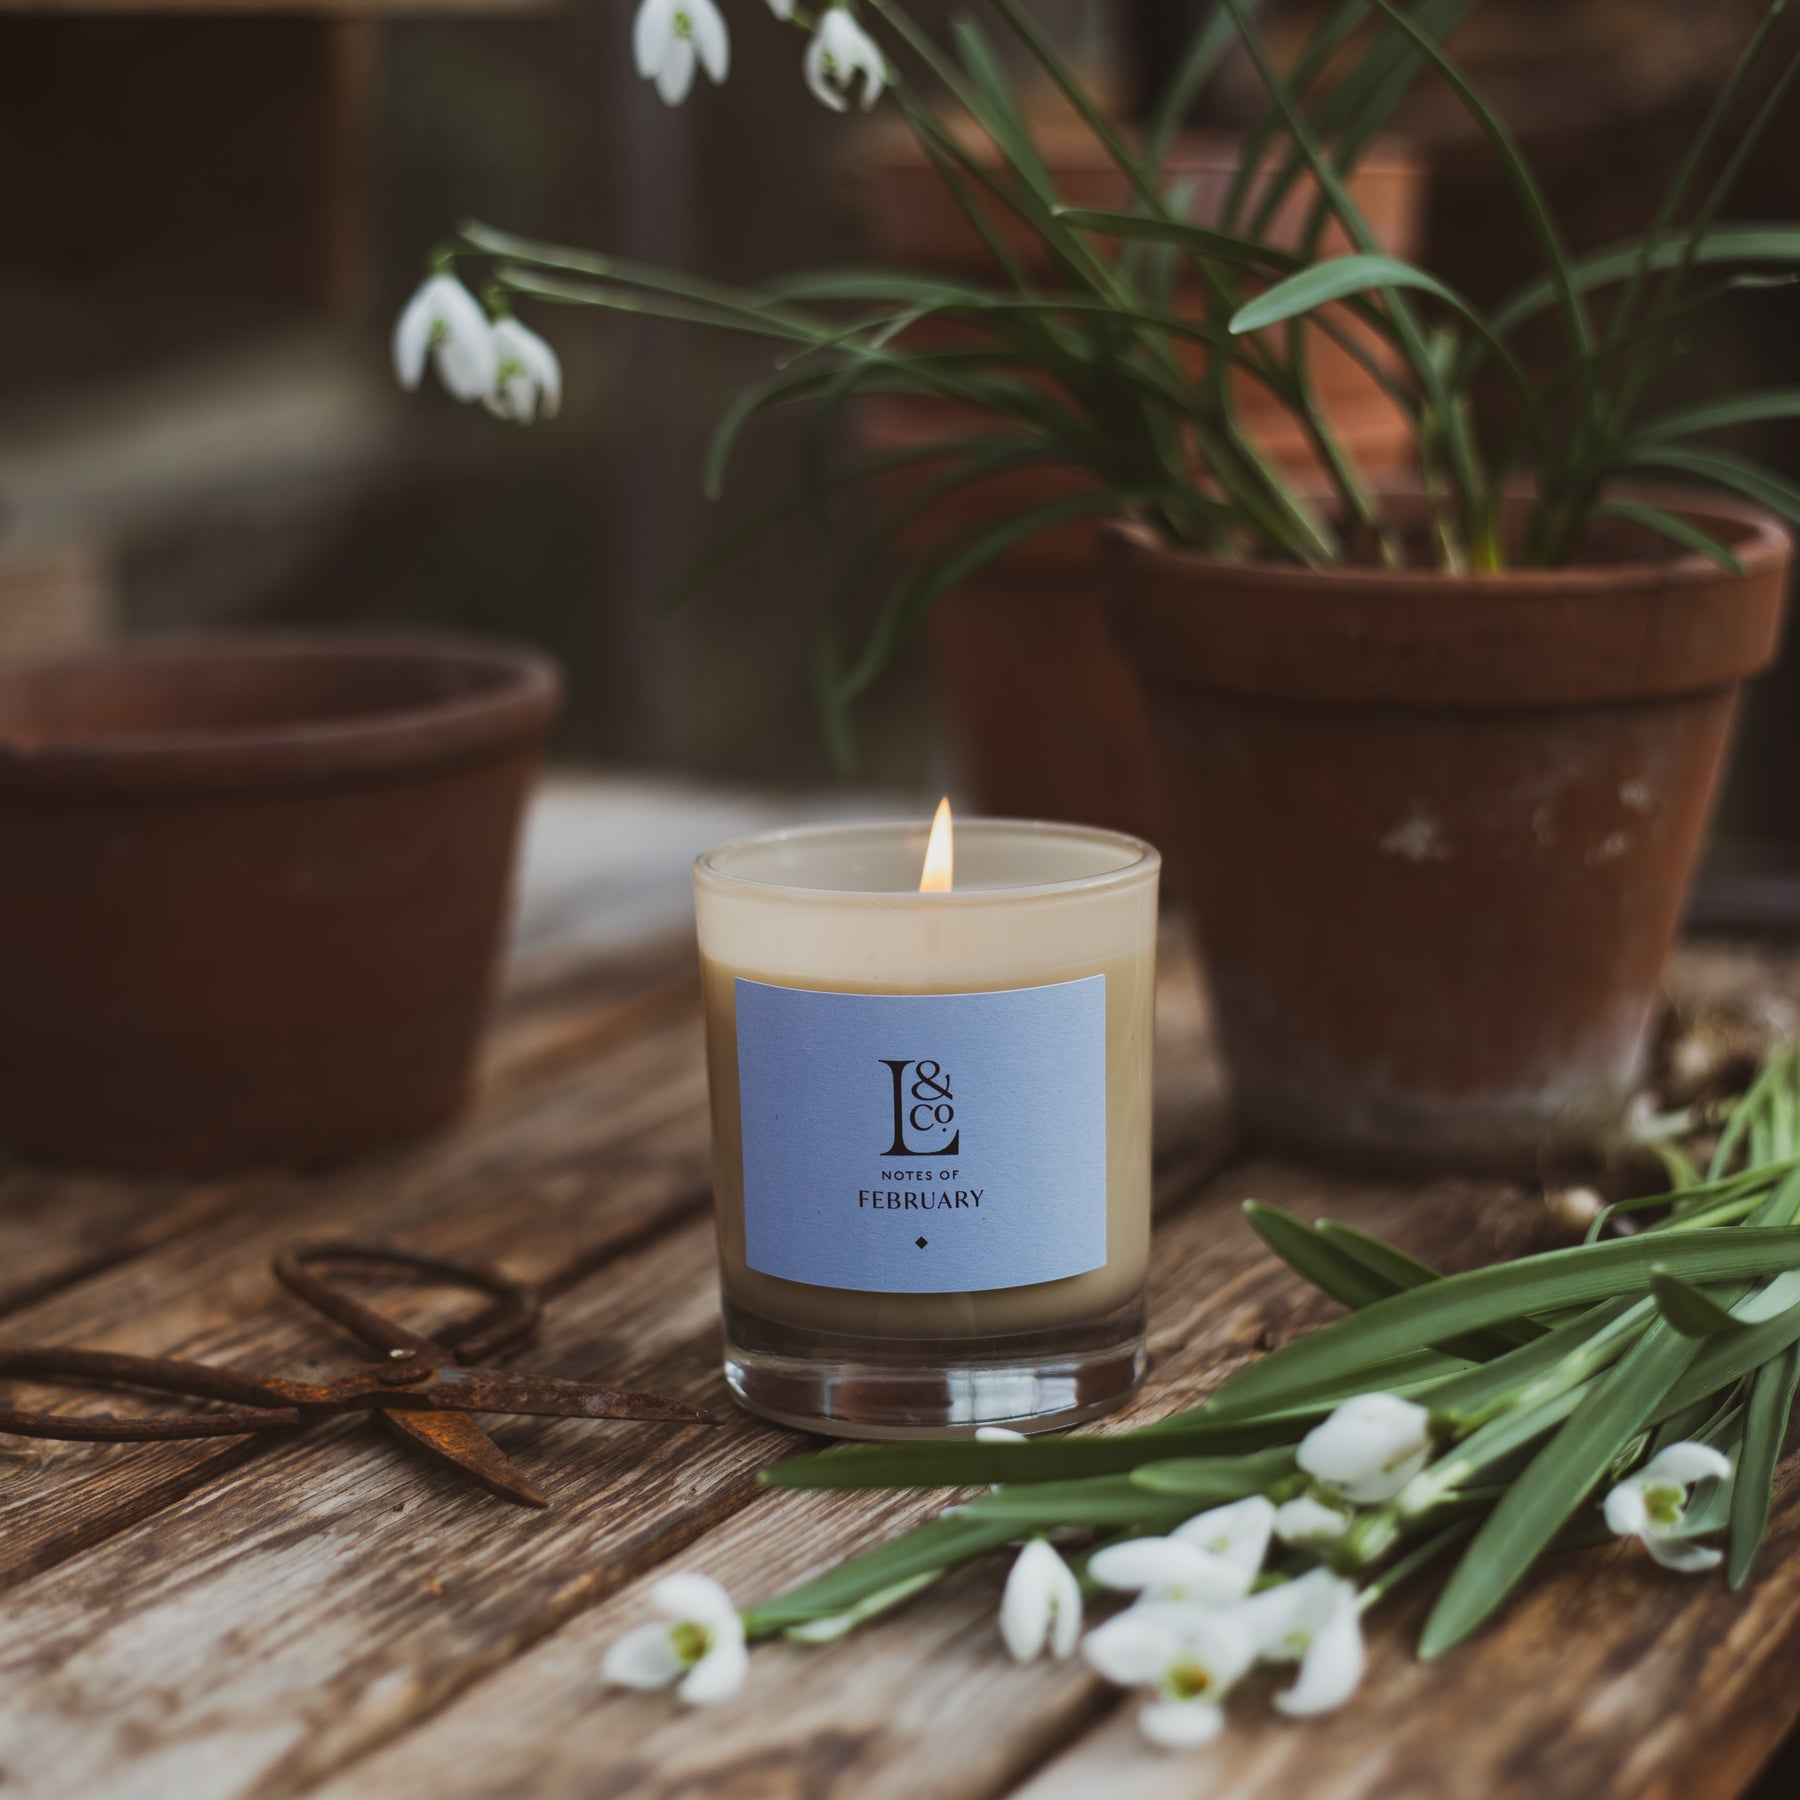 Snowdrop scented candle for a delightful home filled with floral fragrance. Hand-poured sustainable wax. Made in England.